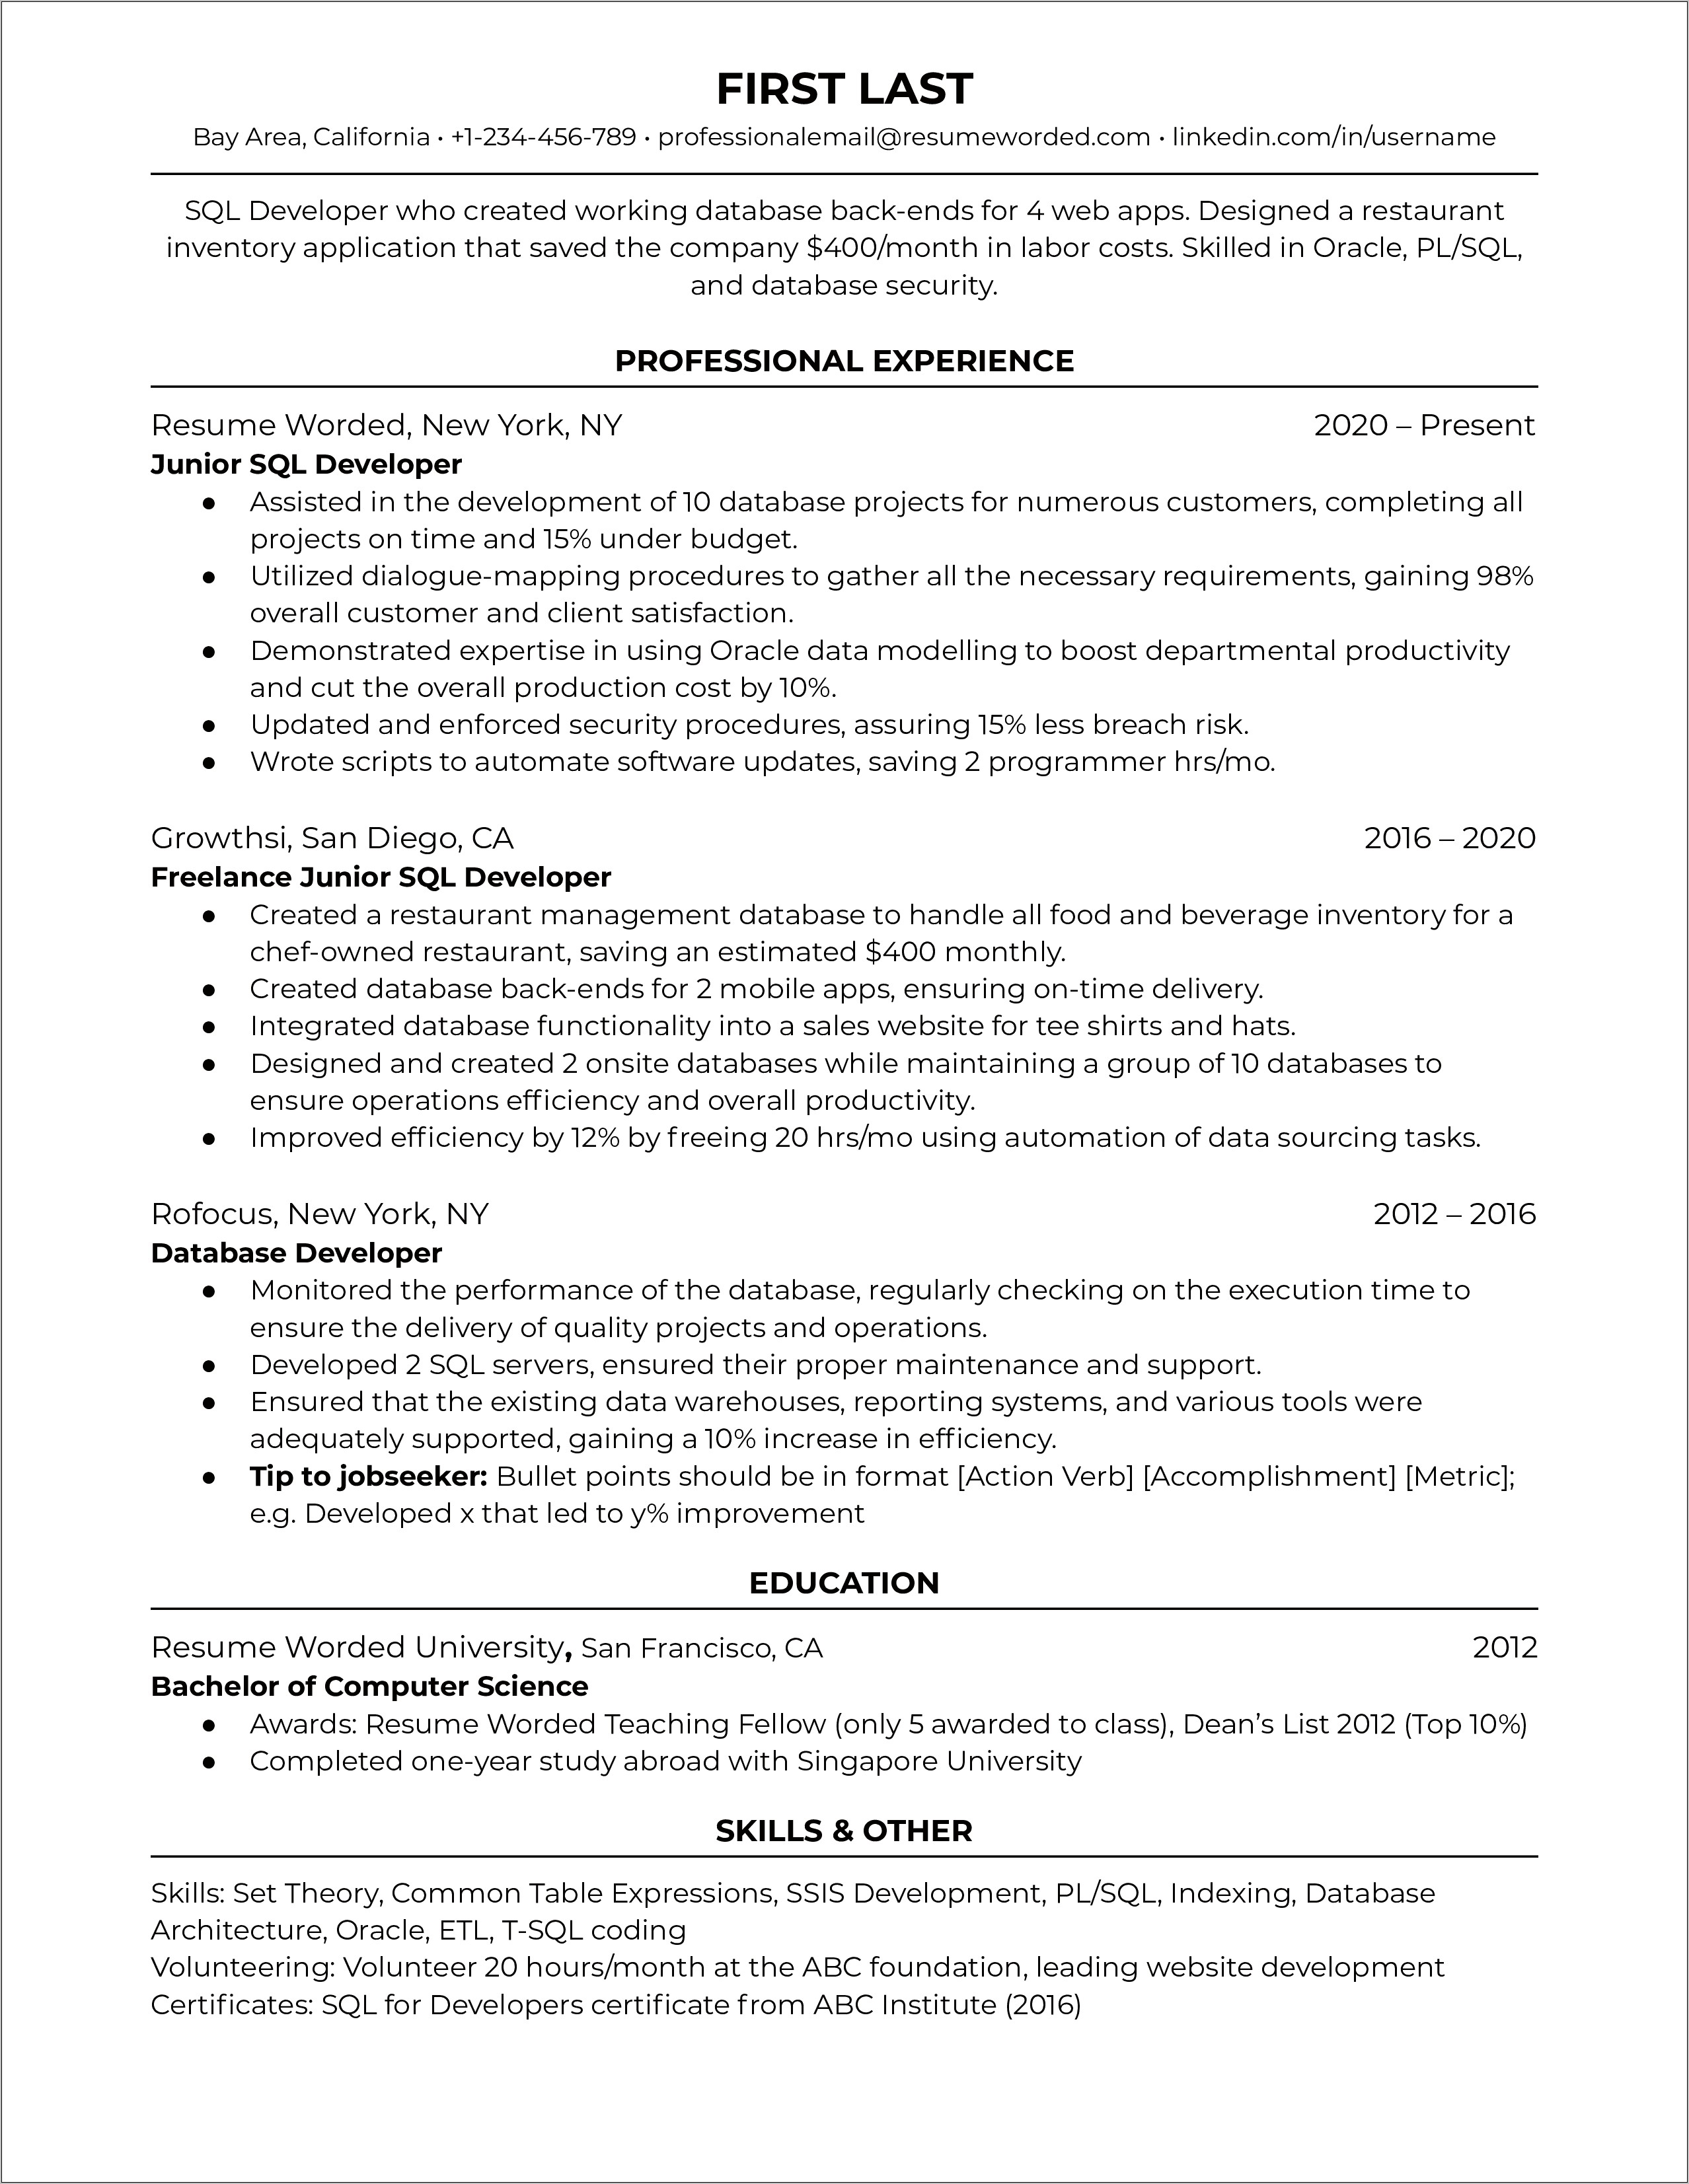 Resume Samples For Oracle Dba